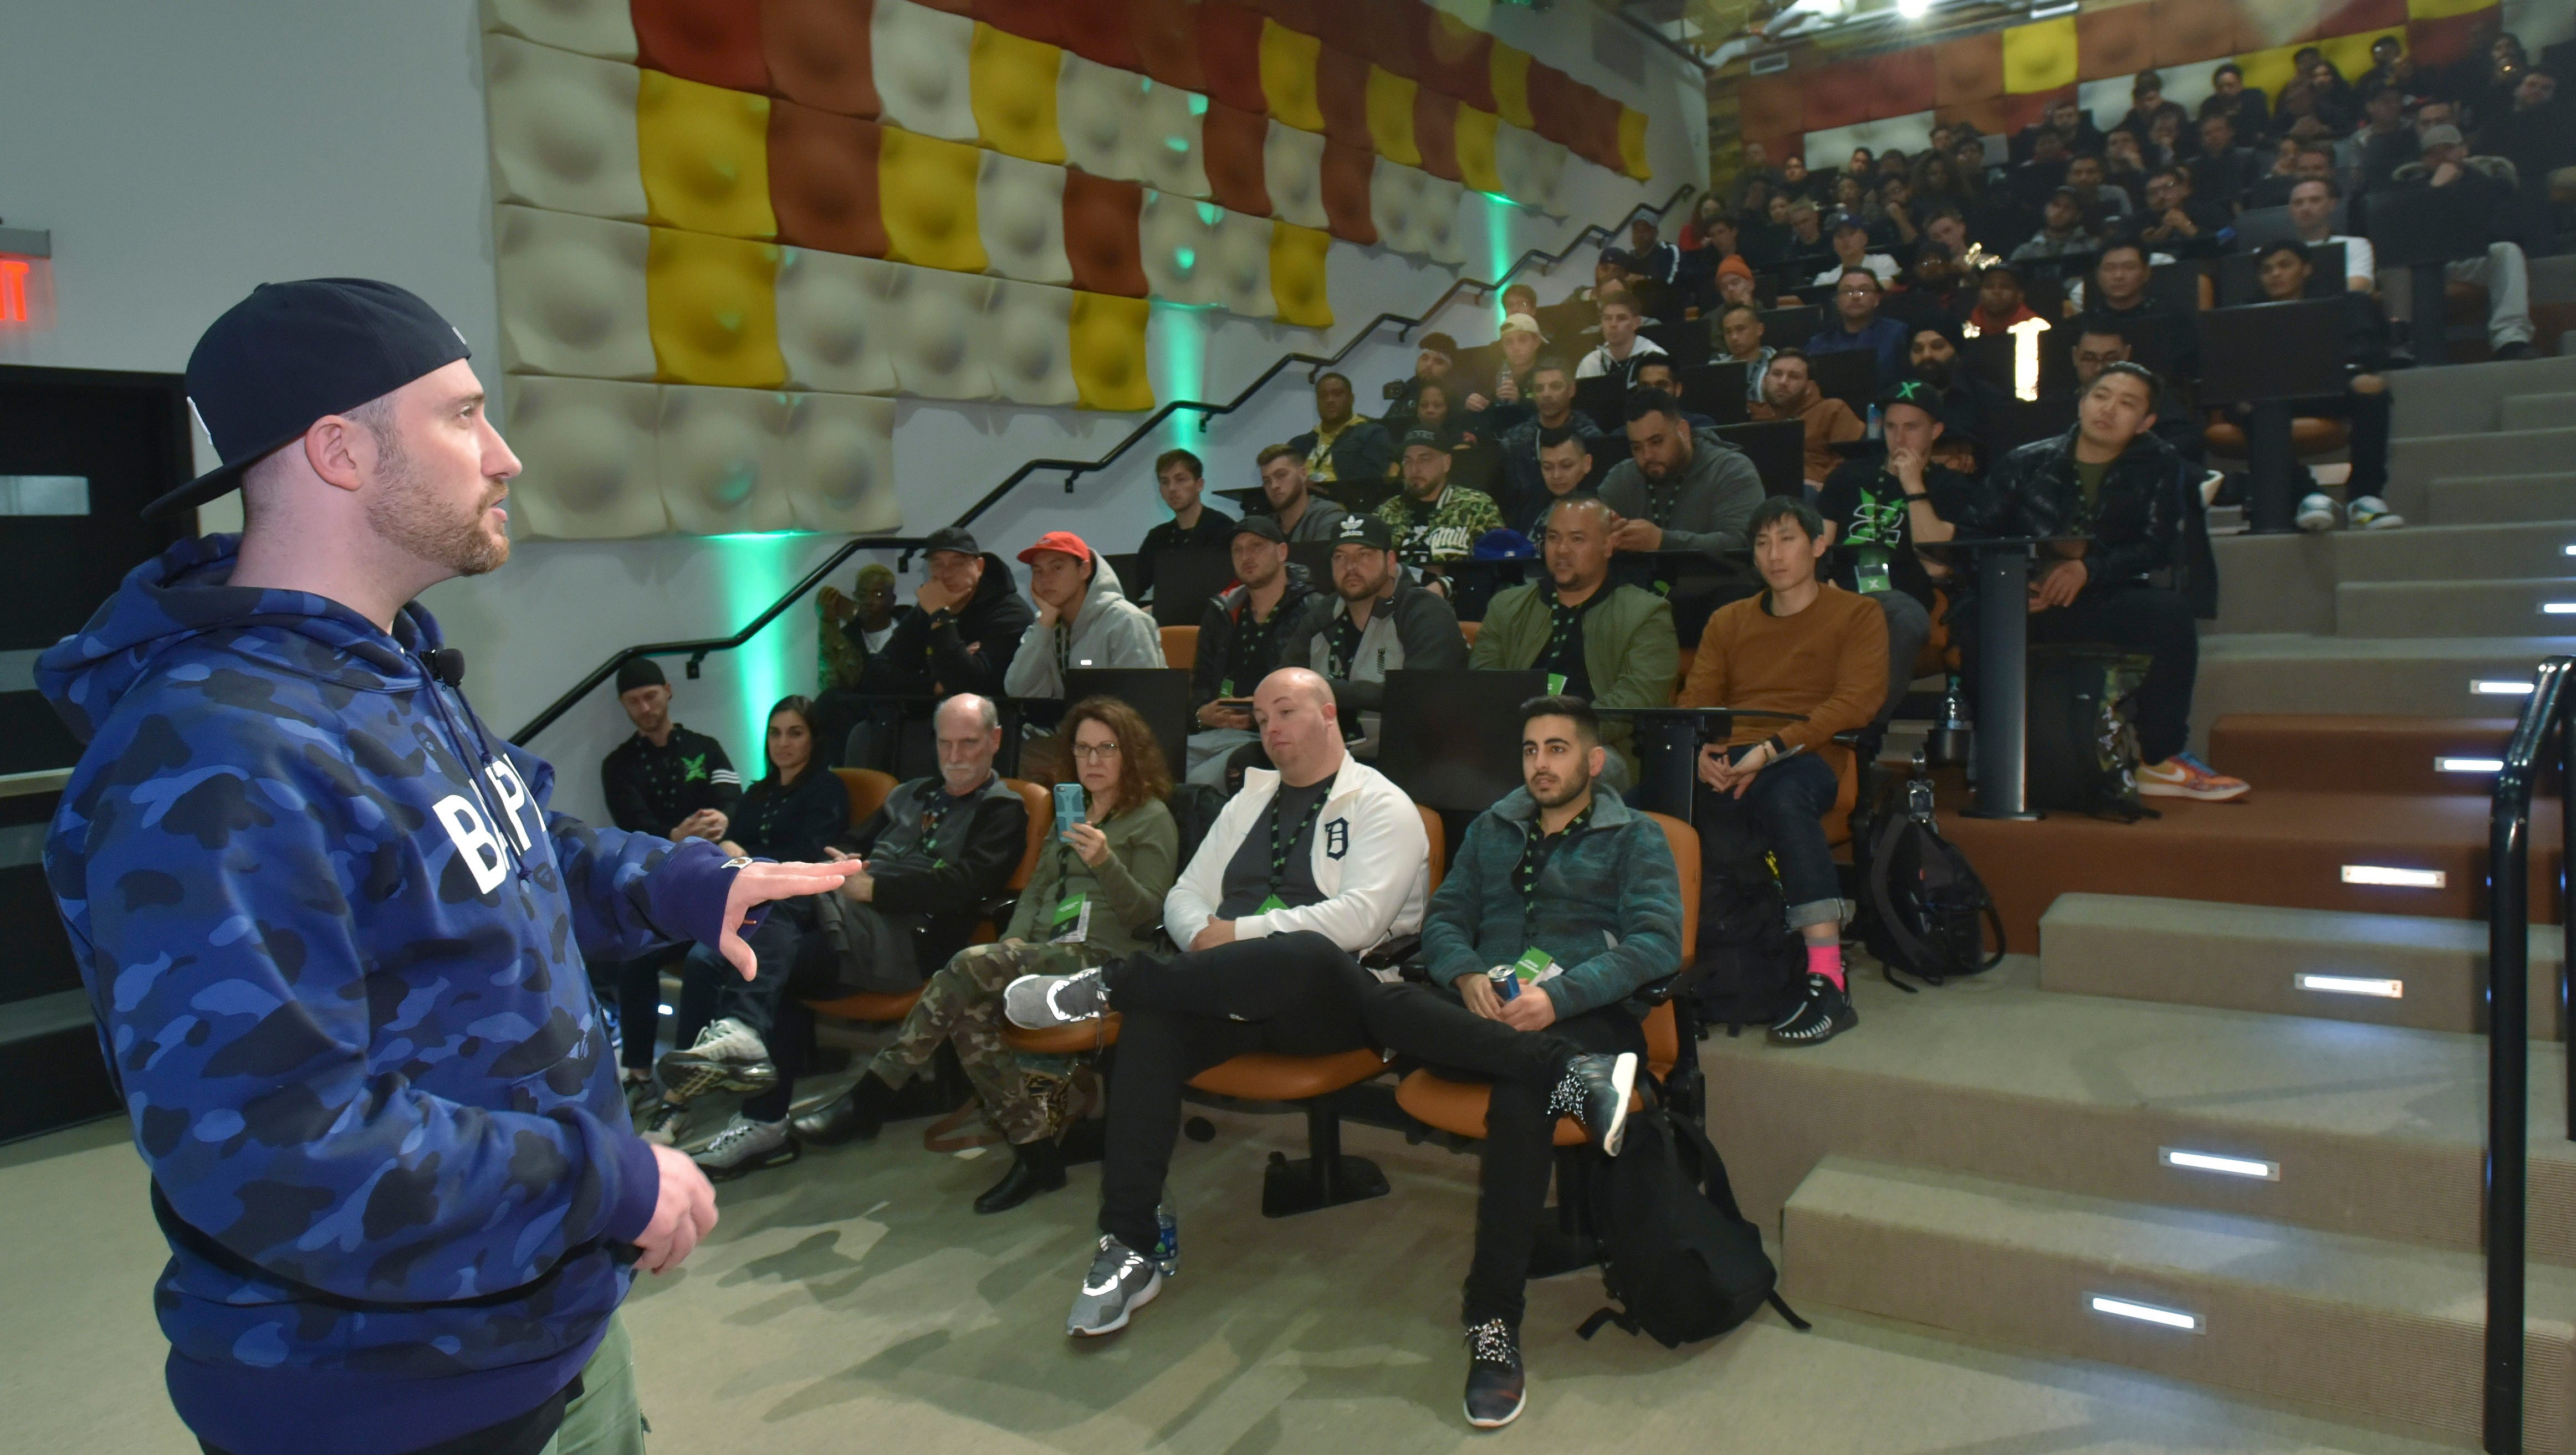 Buyers, sellers and sneake fashion fans listen to StockX CEO and co-founder Josh Luber during the StockX Day2 event in Detroit recently.